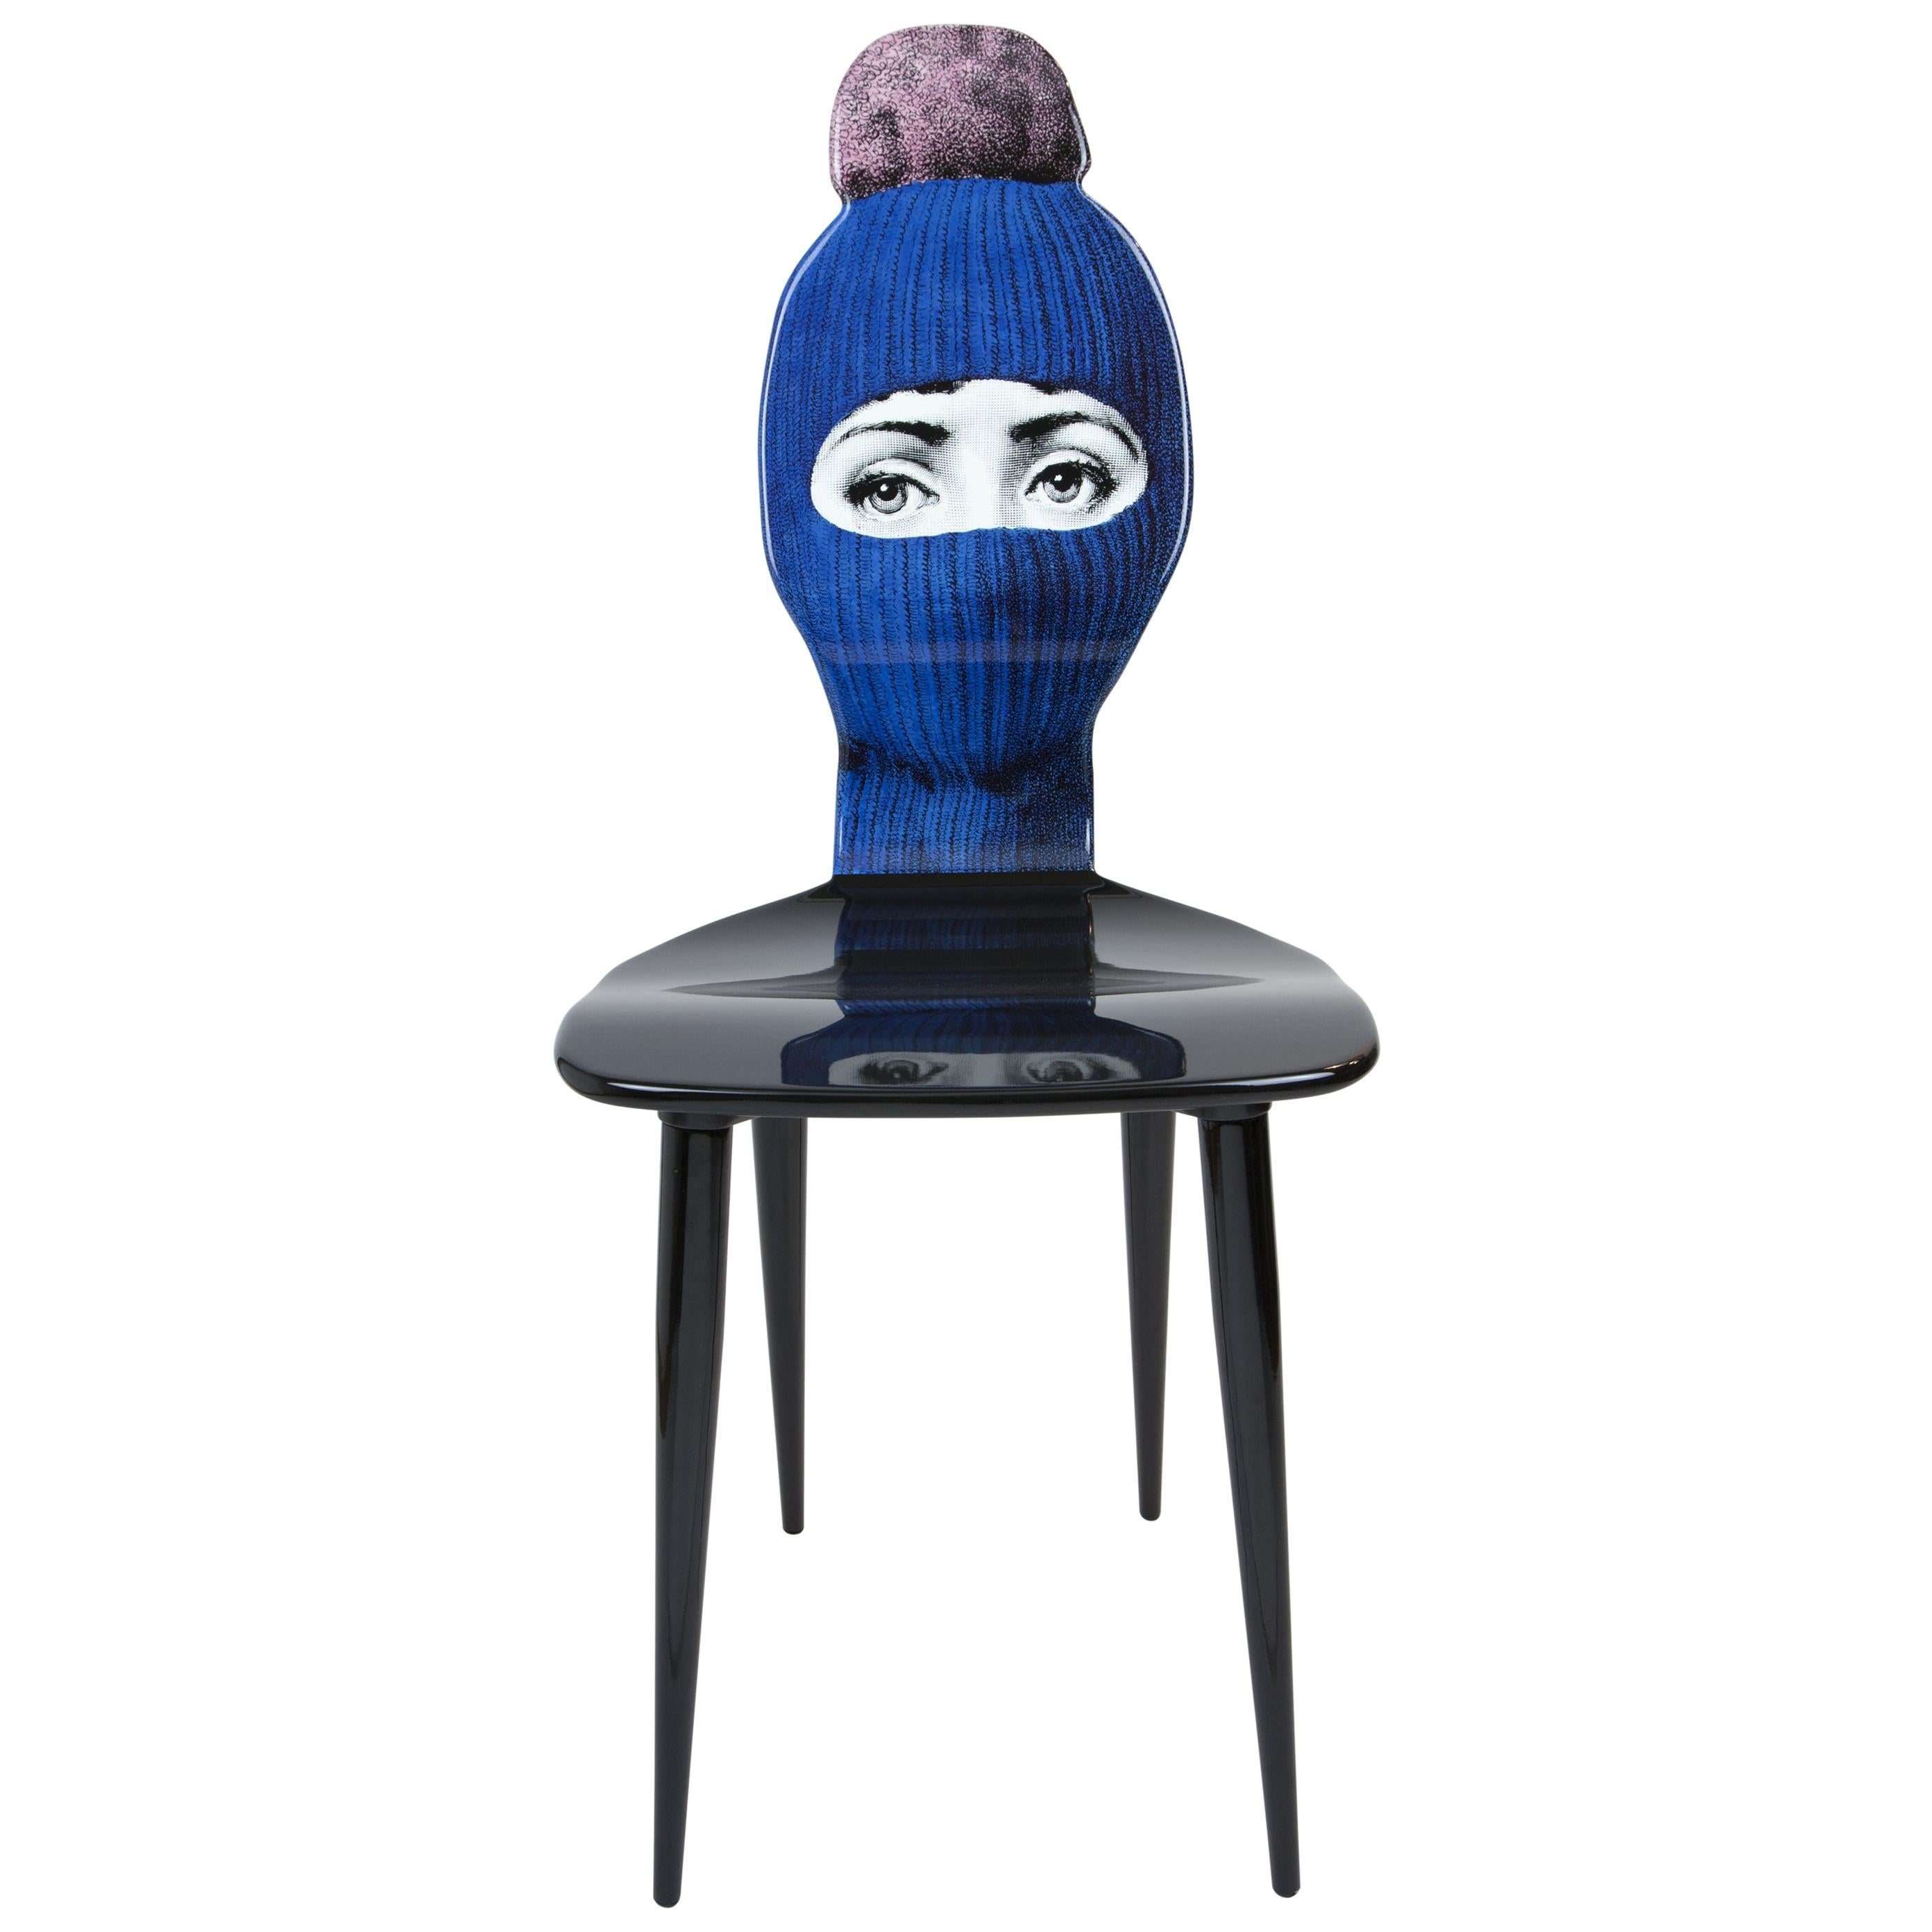 Fornasetti Chair Lux Gstaad Blue Ponpon Pink Hand Painted Wood